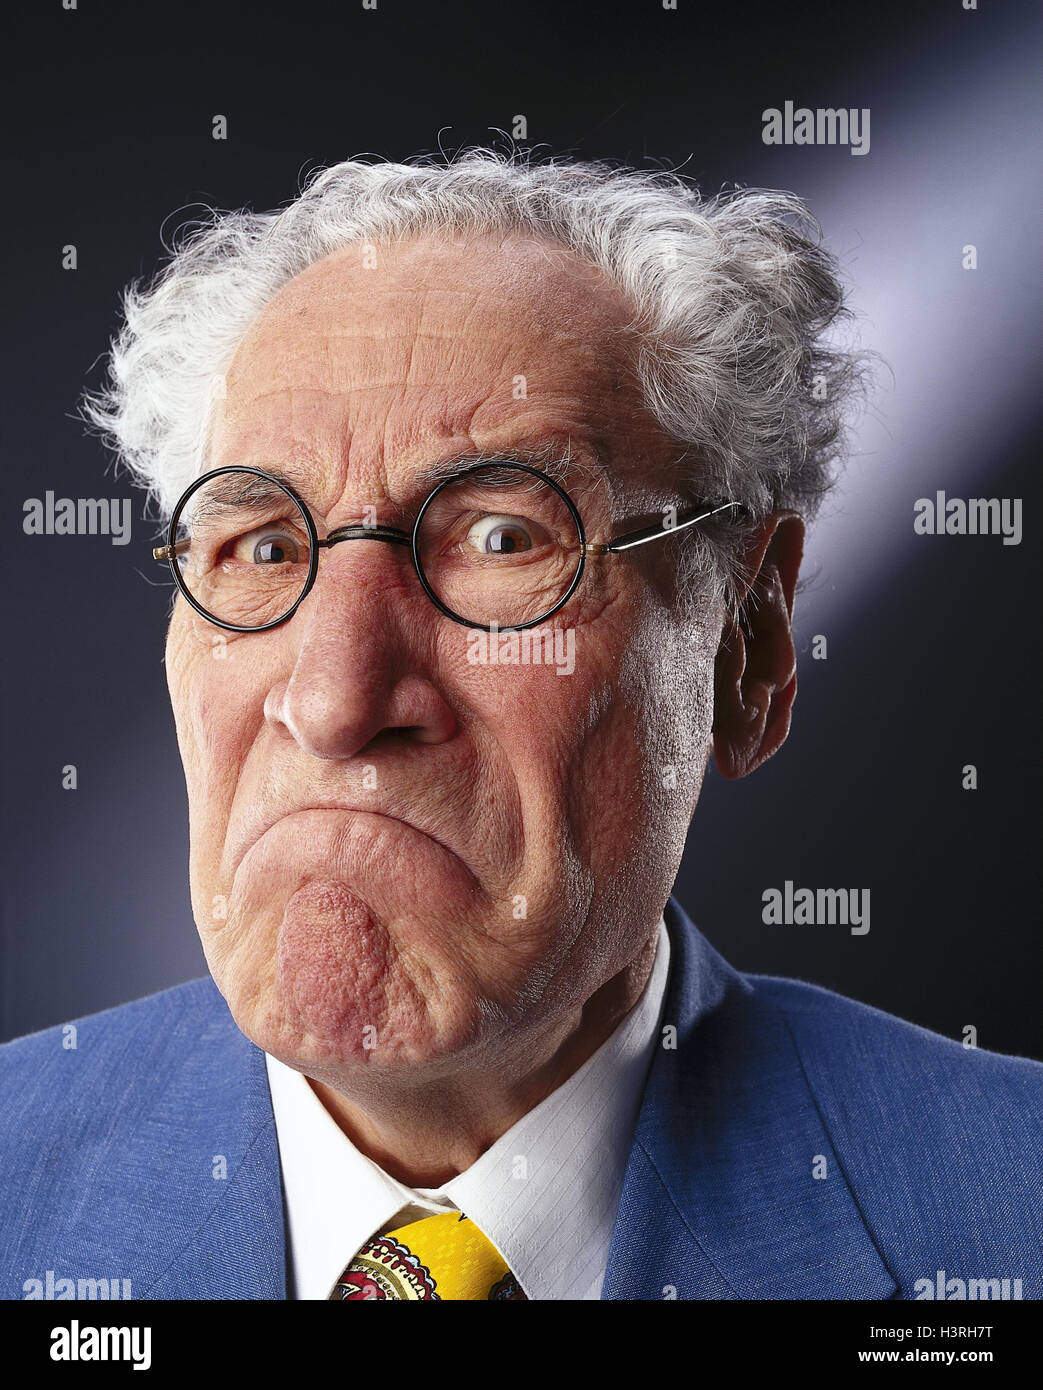 Senior, glasses, facial play, fiercely, portrait, mb 120 A2 Stock Photo